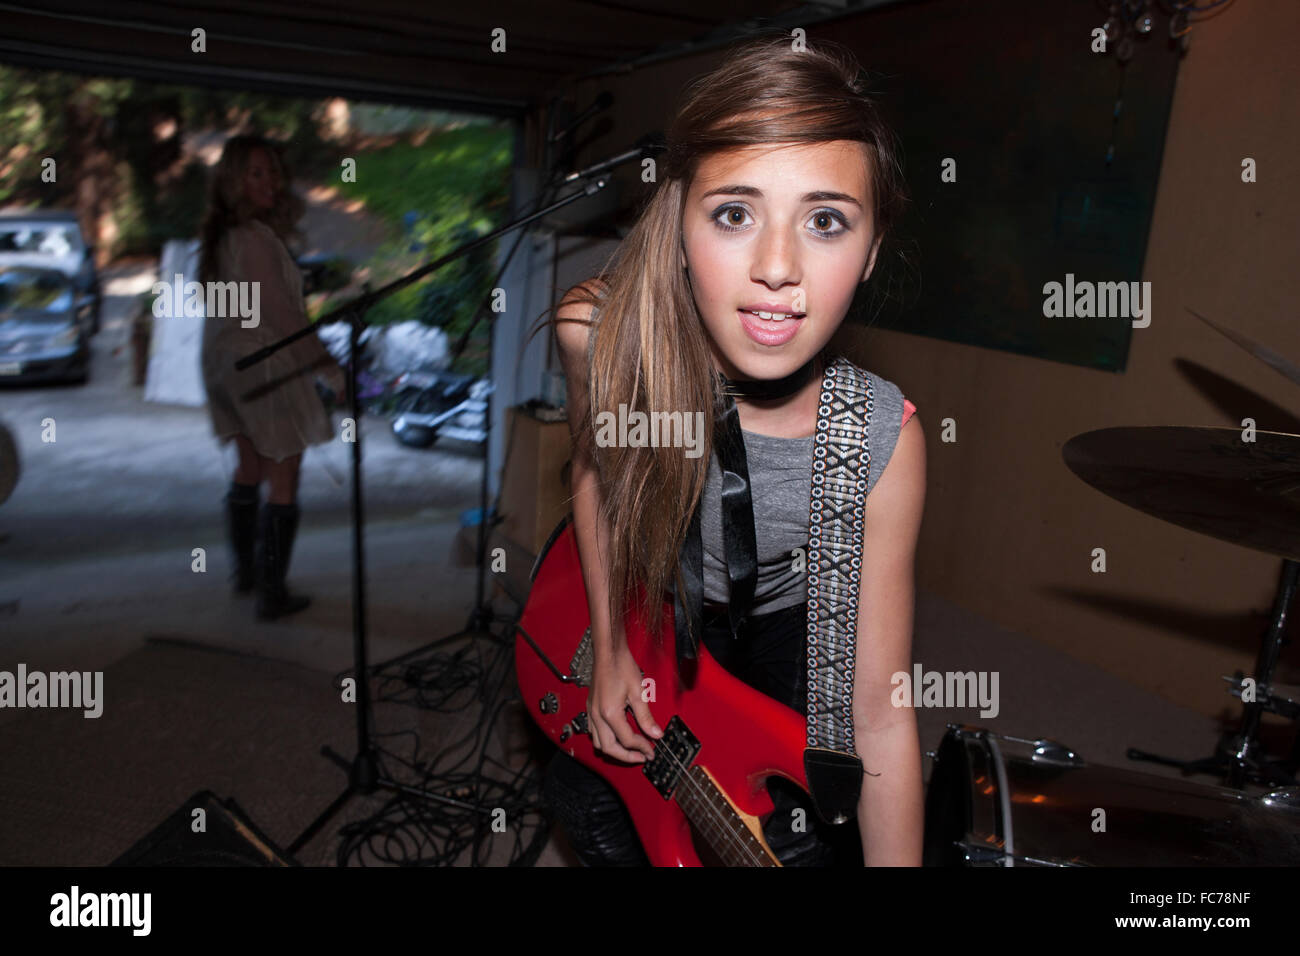 Girl playing guitar in rock band Stock Photo